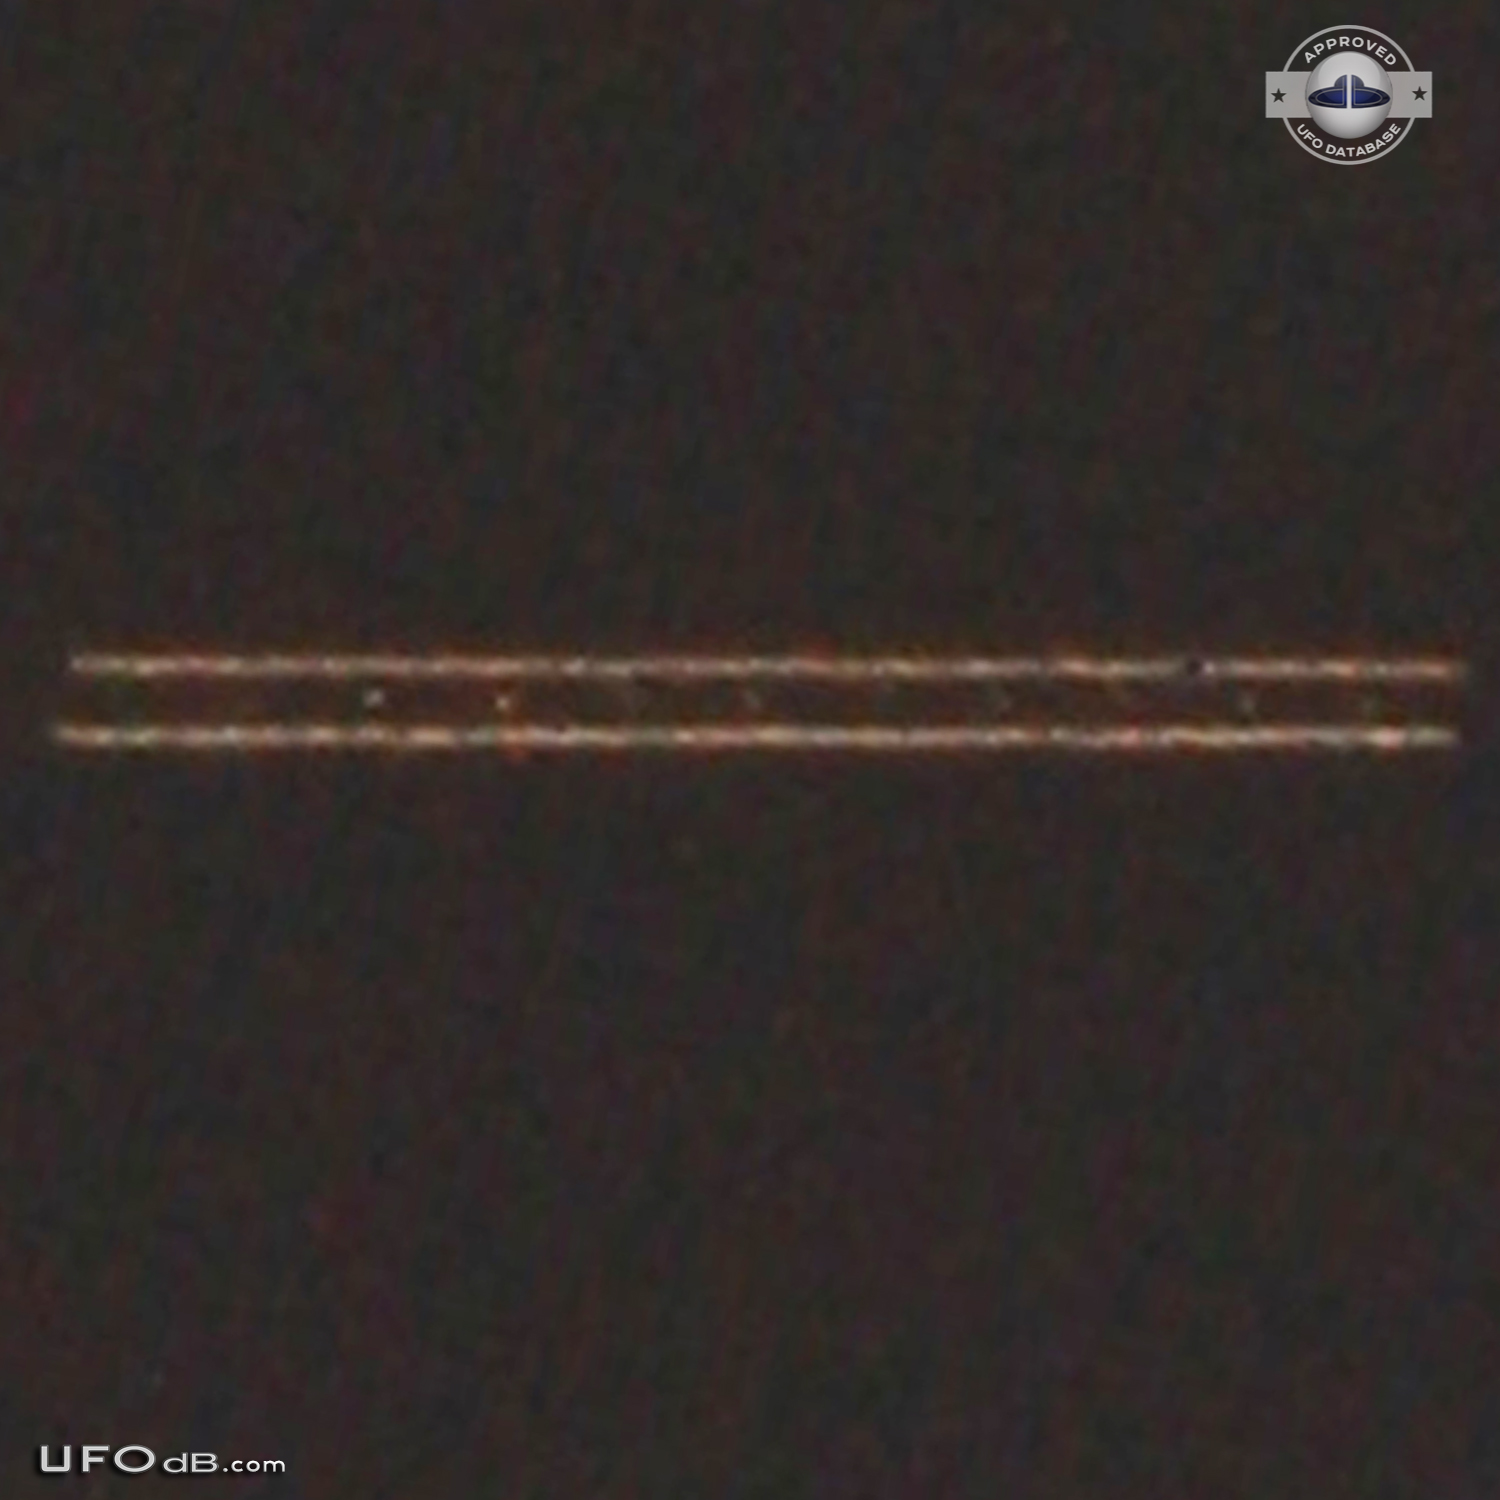 Long UFO ship in the space caught on picture over Toronto Ontario 2012 UFO Picture #514-4